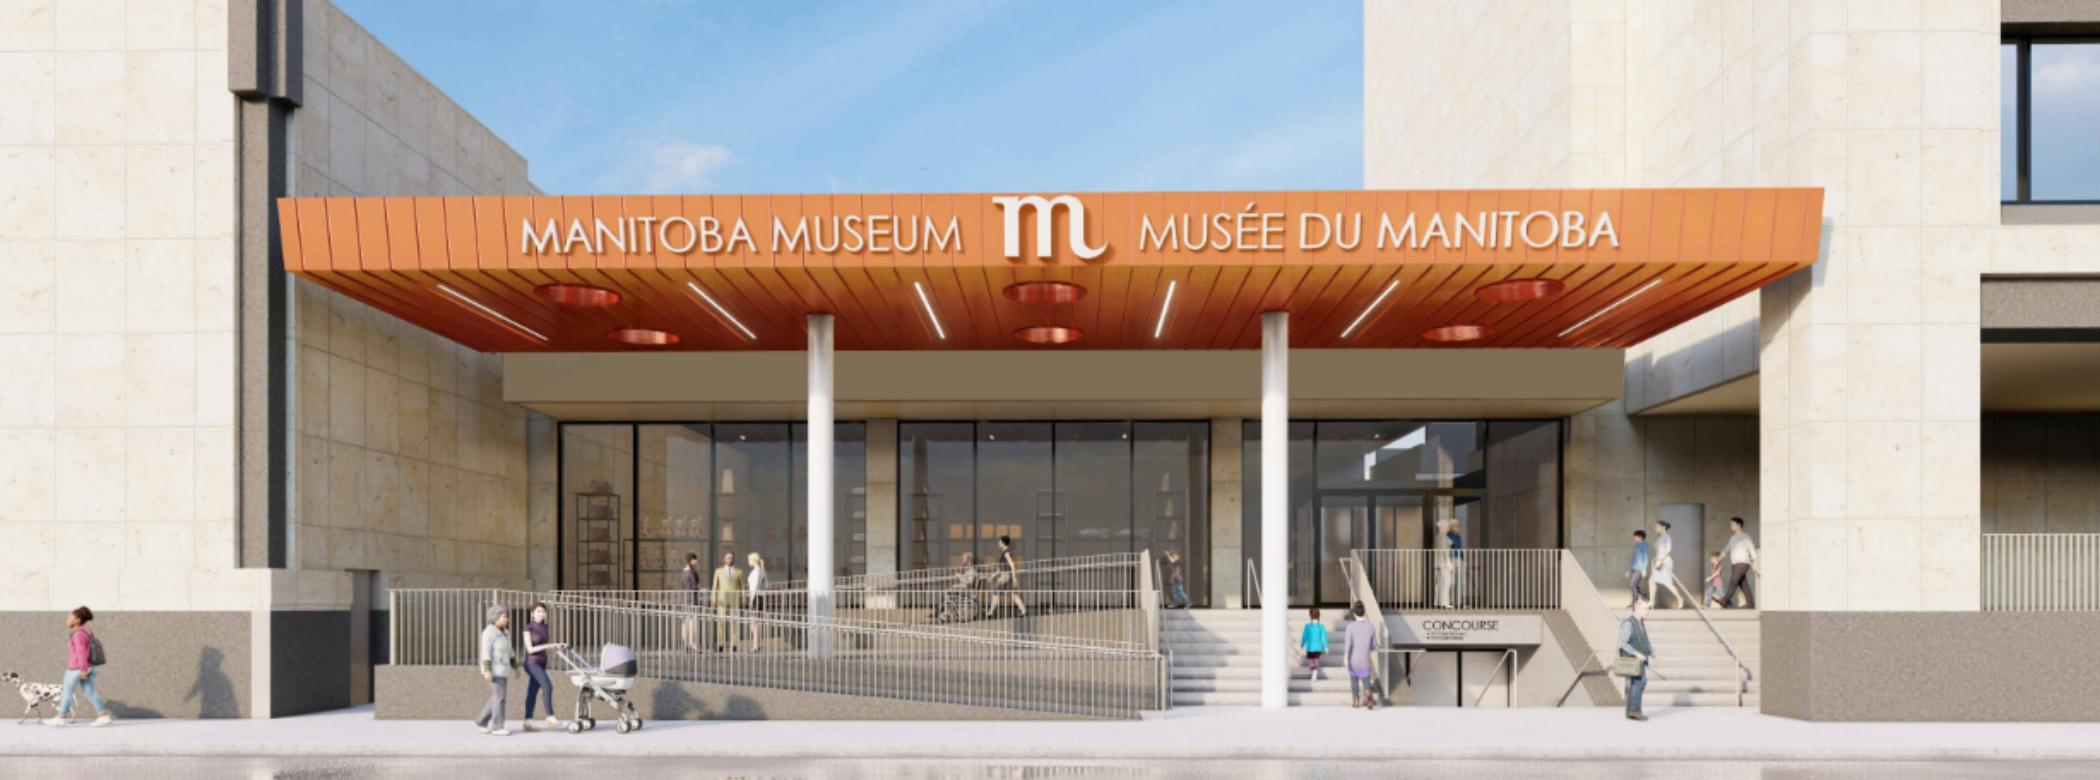 A rendering of the new Manitoba Museum Rupert Street entrance during the day, with a copper-coloured awning sheltering the entrance stairs and an updated ramp with a guard rail next to full glass walls and entrance door into the foyer.